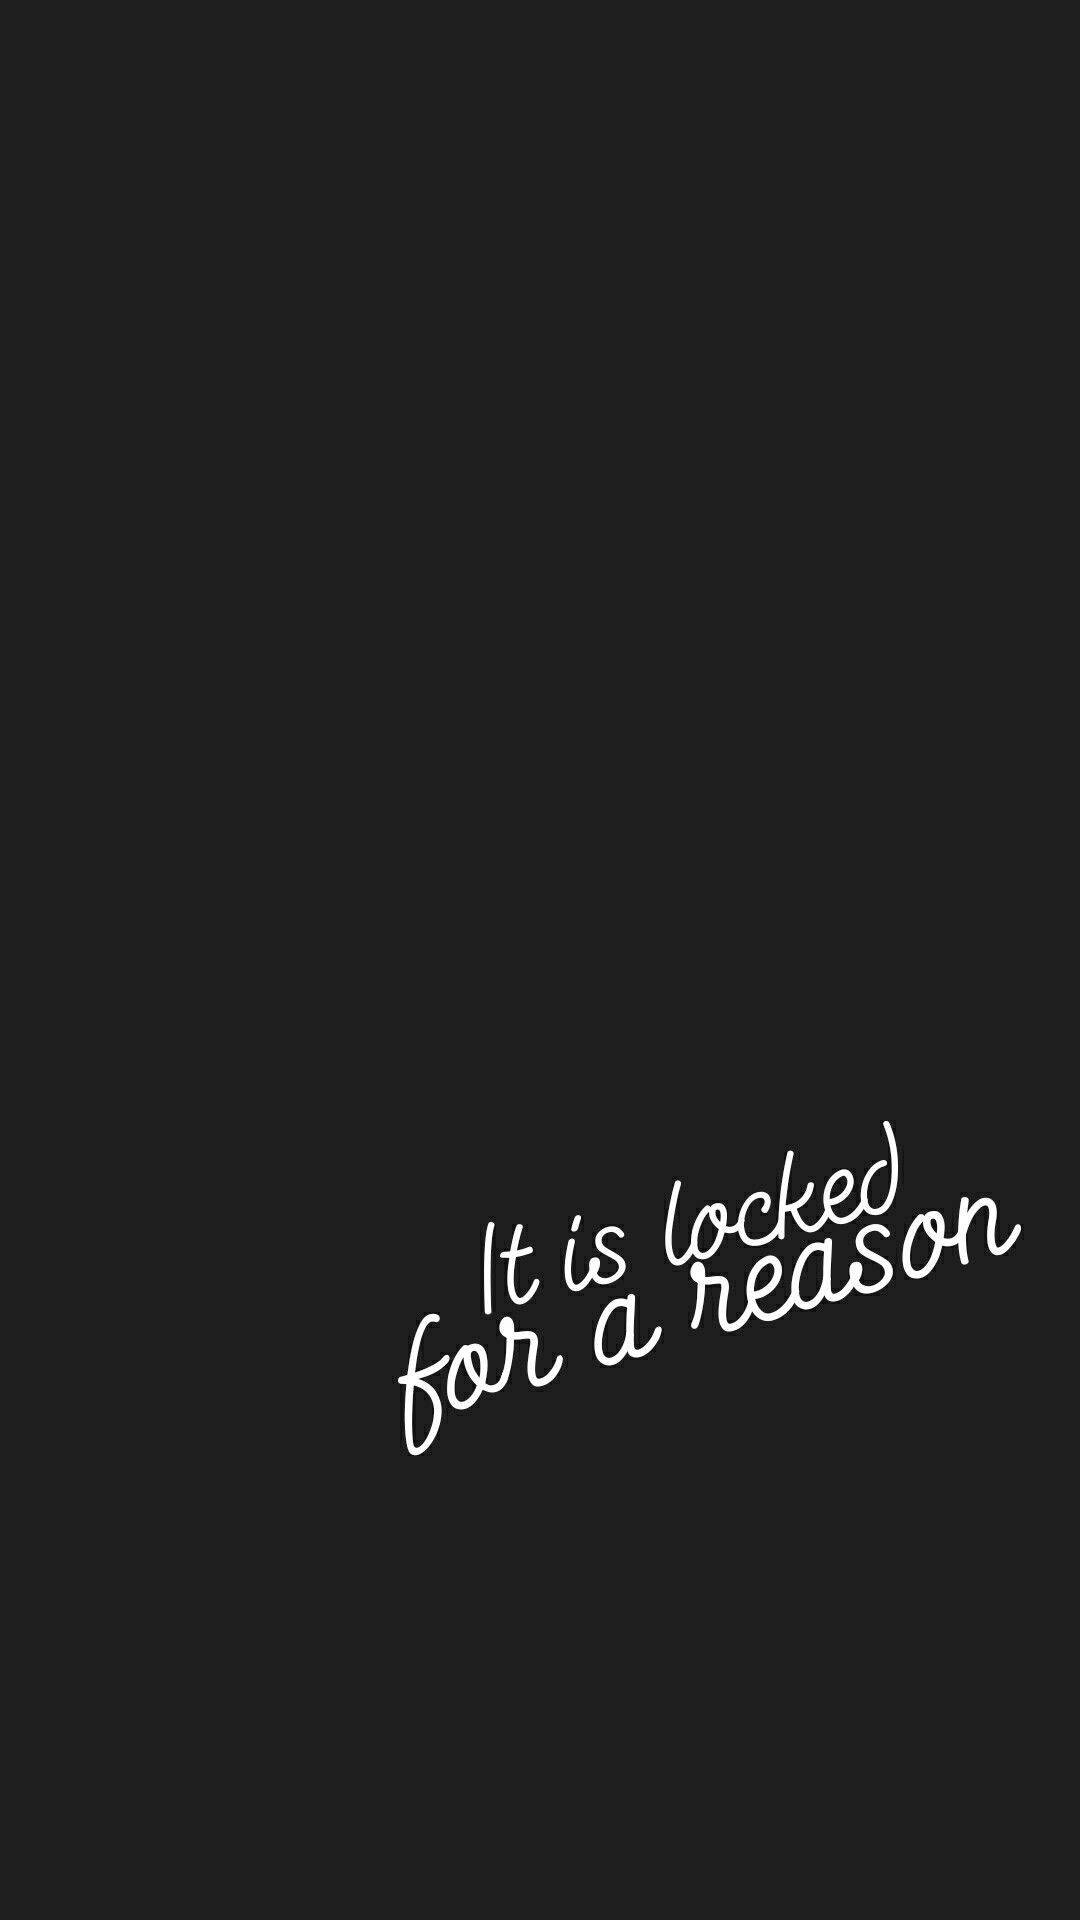 Cute Styled Text Black Phone Wallpaper